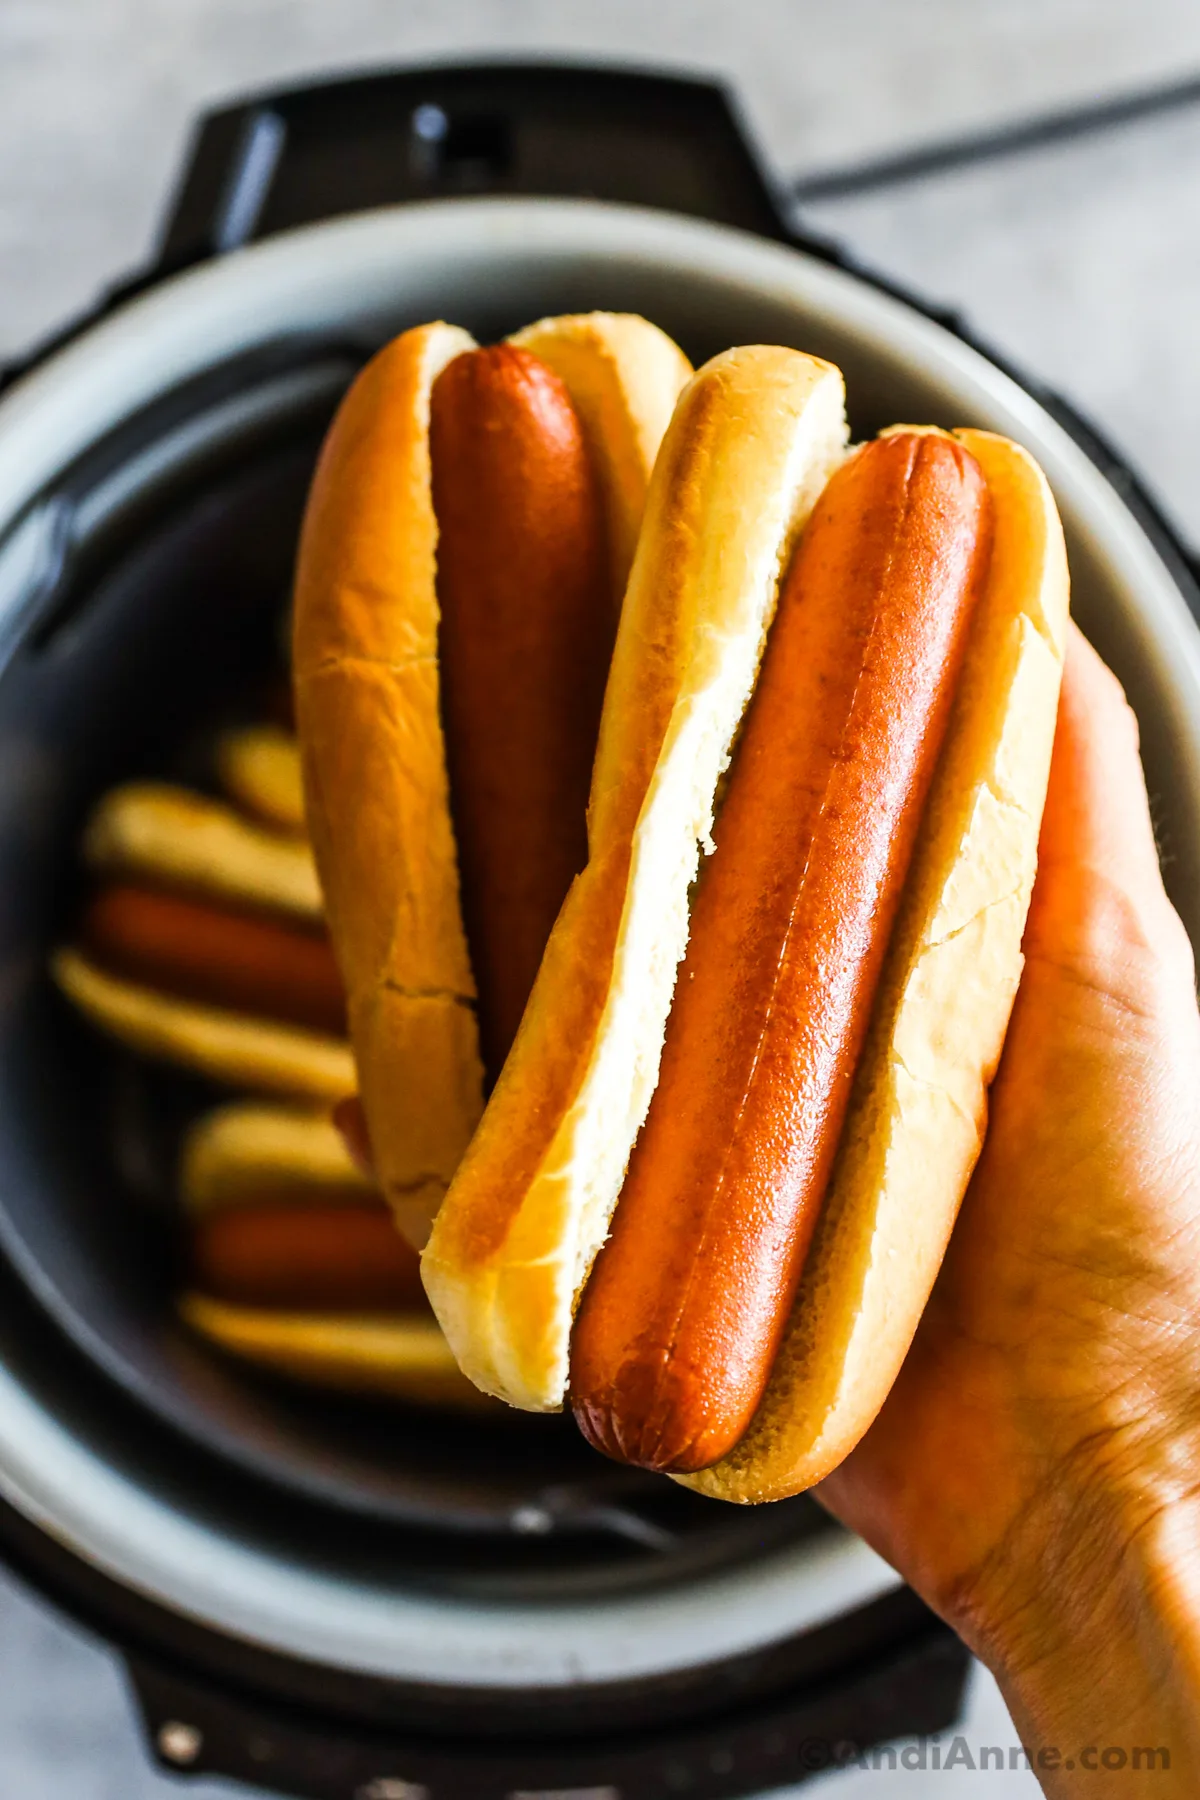 Hand holding two hot dogs above an air fryer.